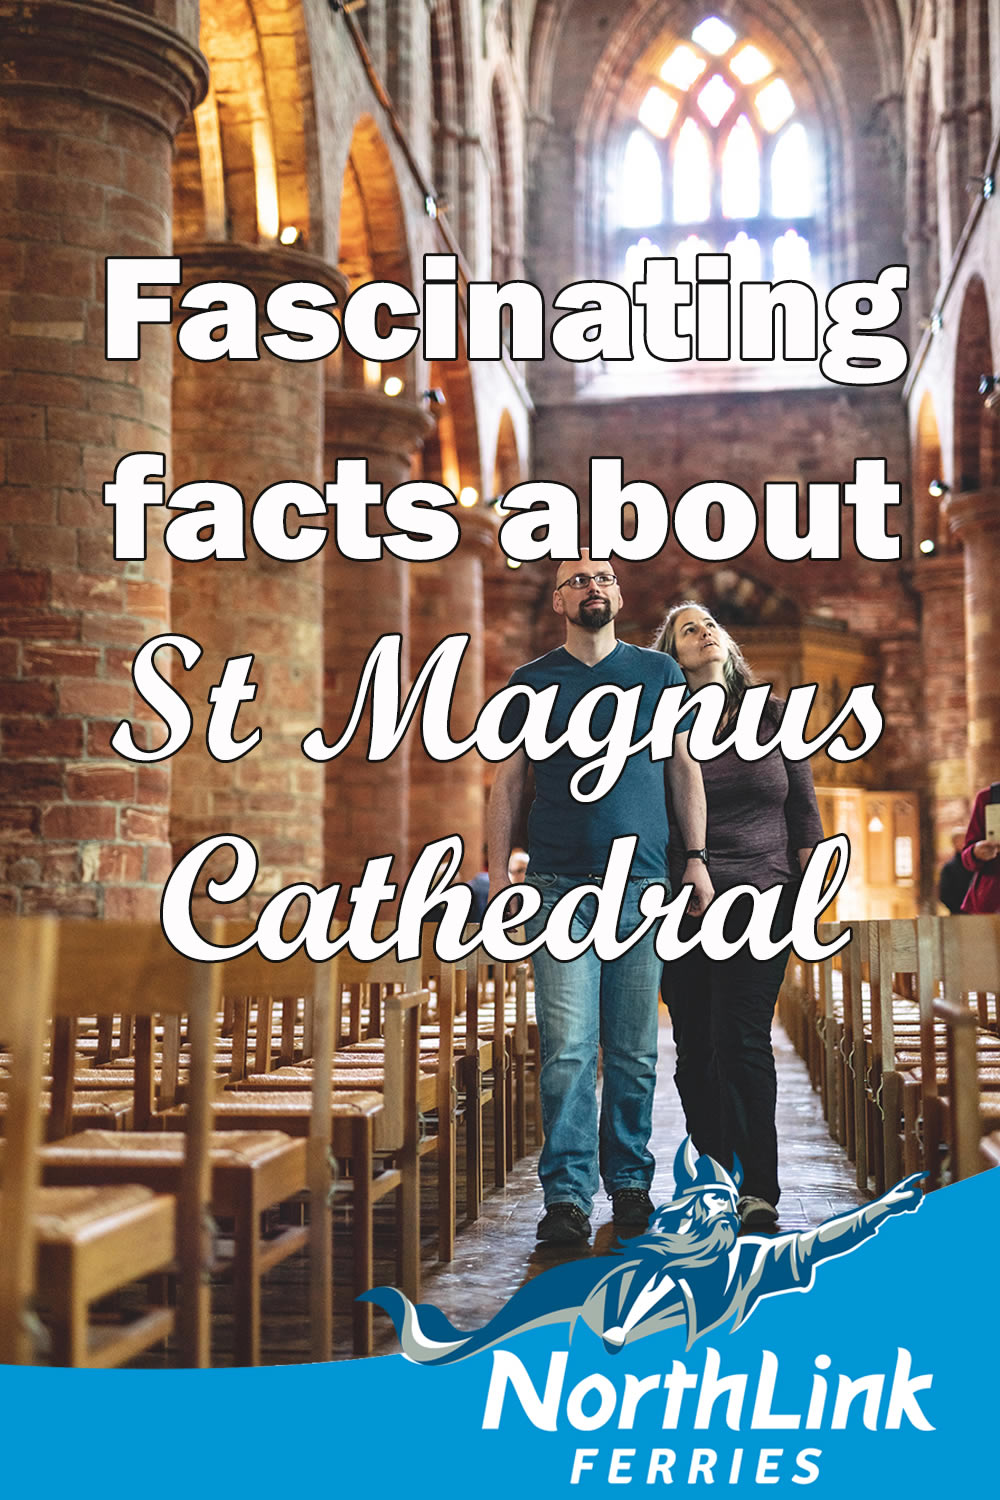 Fascinating facts about St Magnus Cathedral